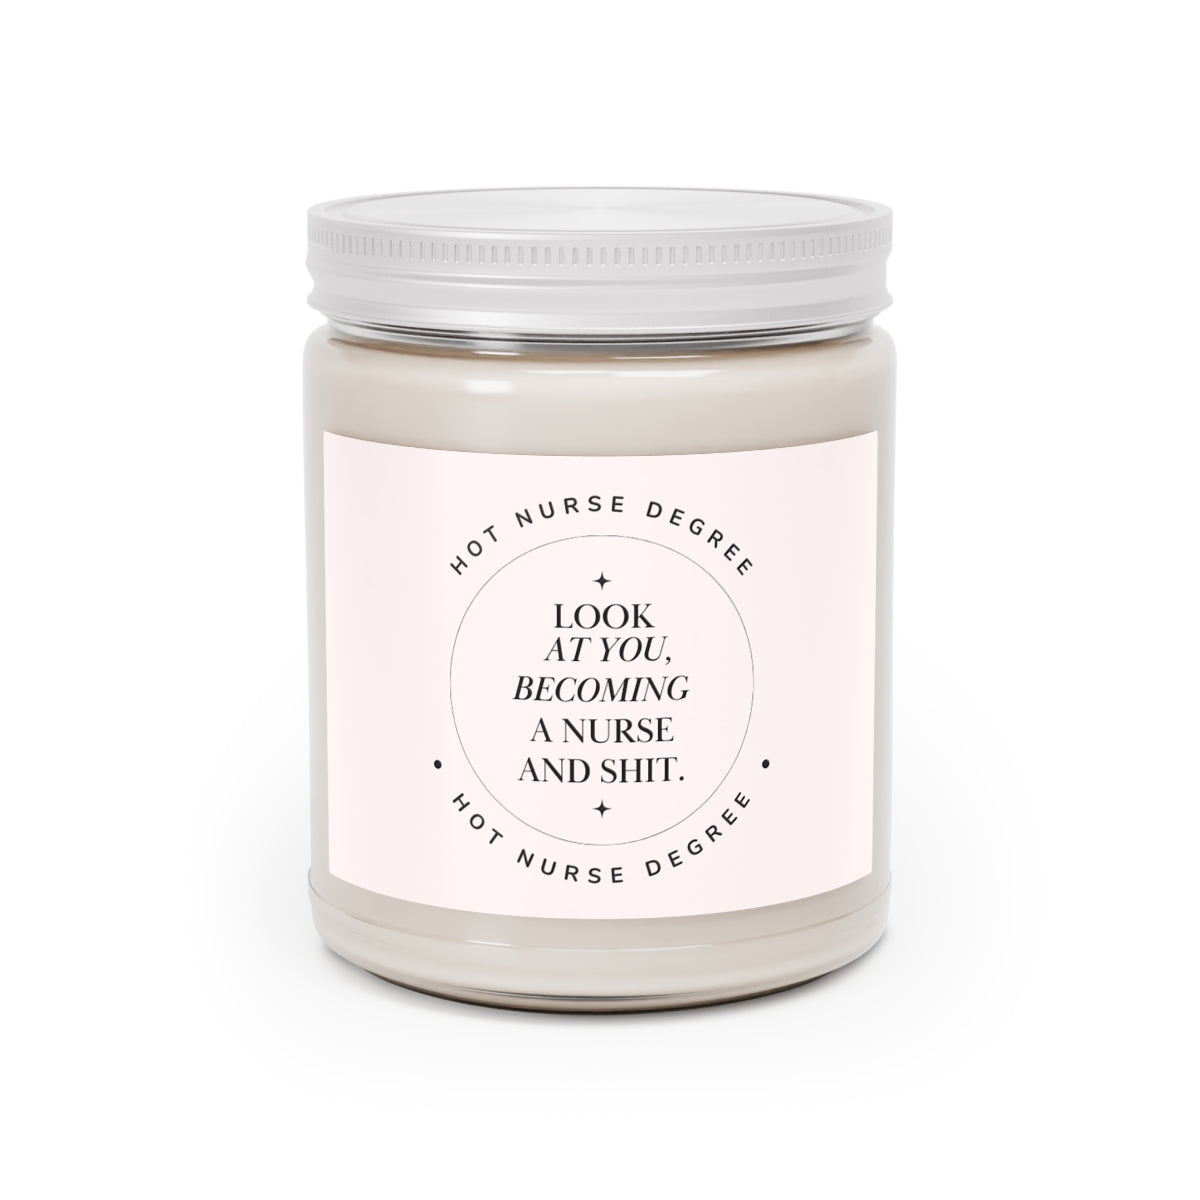 Look At You, Becoming a Nurse and Shit Scented Candles, 9oz Home Decor Printify Sea Breeze One size 